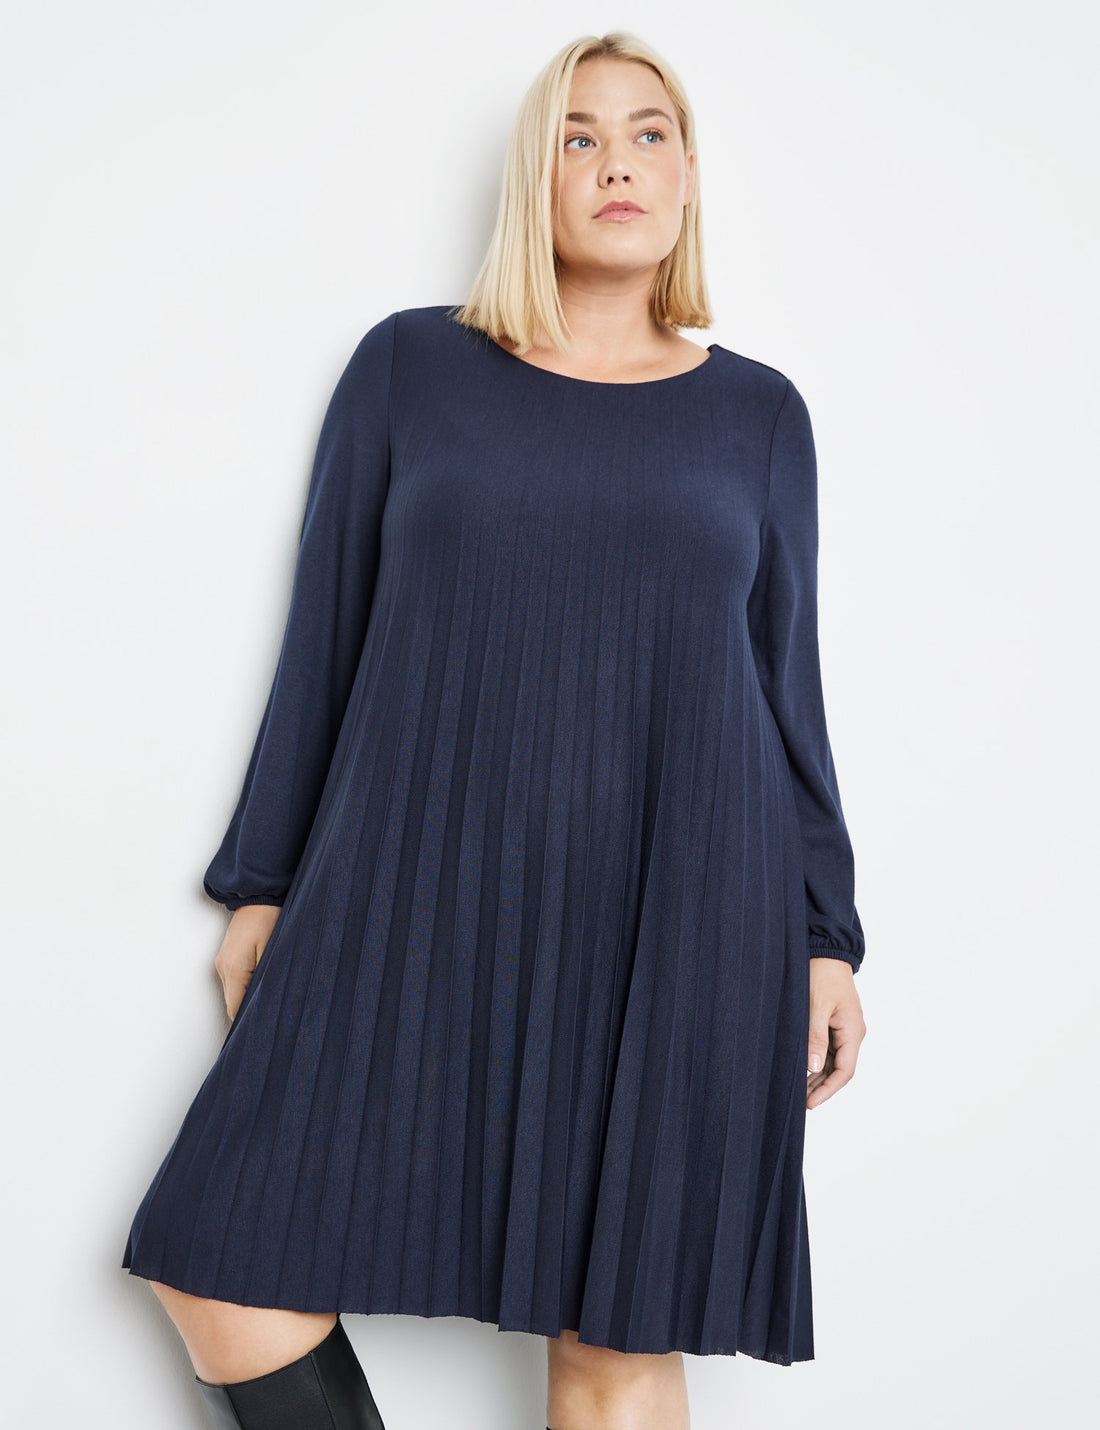 Pleated Skirt Made Of Soft Jersey_381211-26418_8450_01